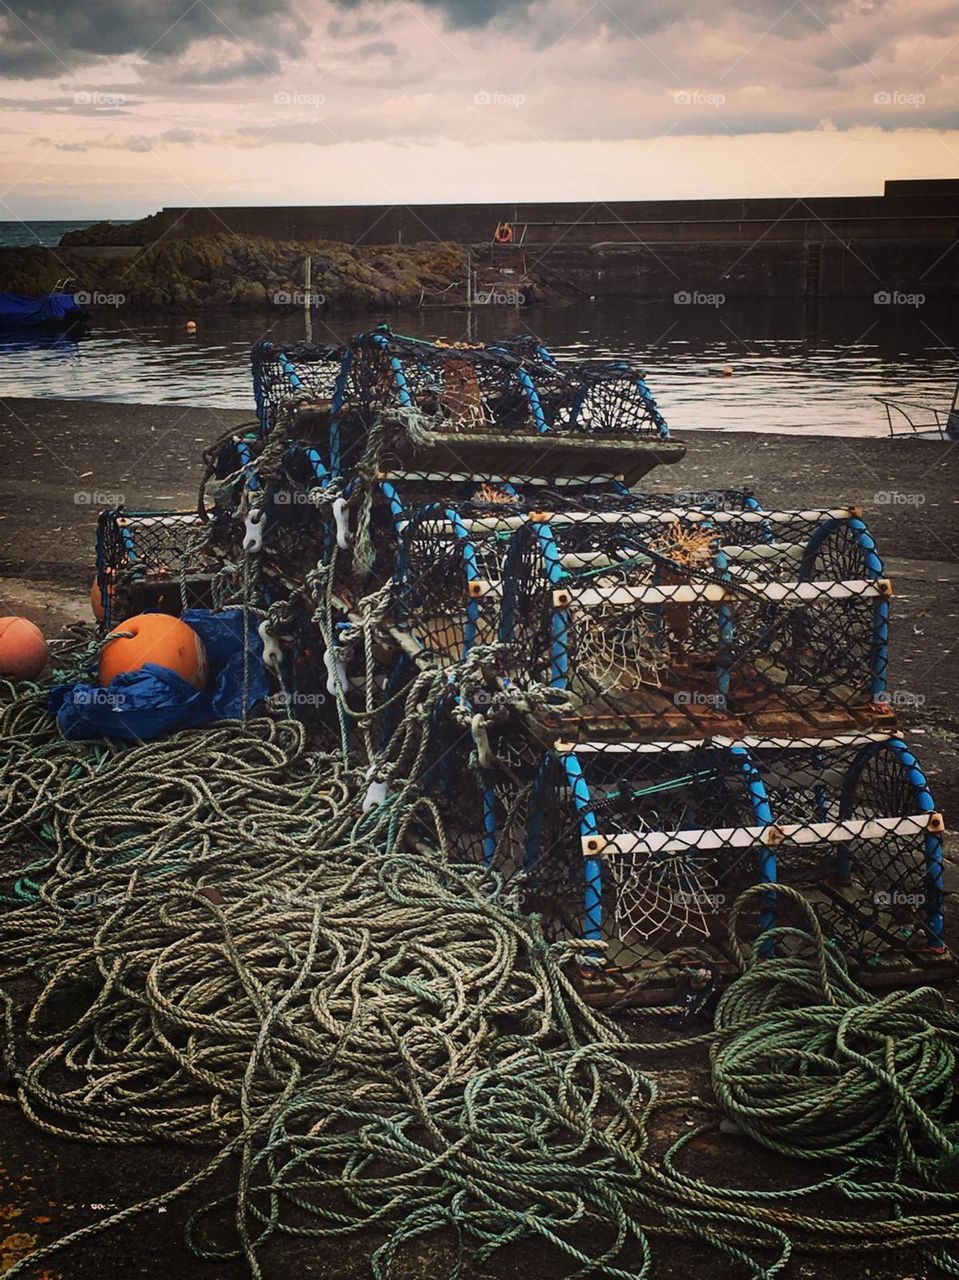 Lobster nets and ropes in a small fishing village 